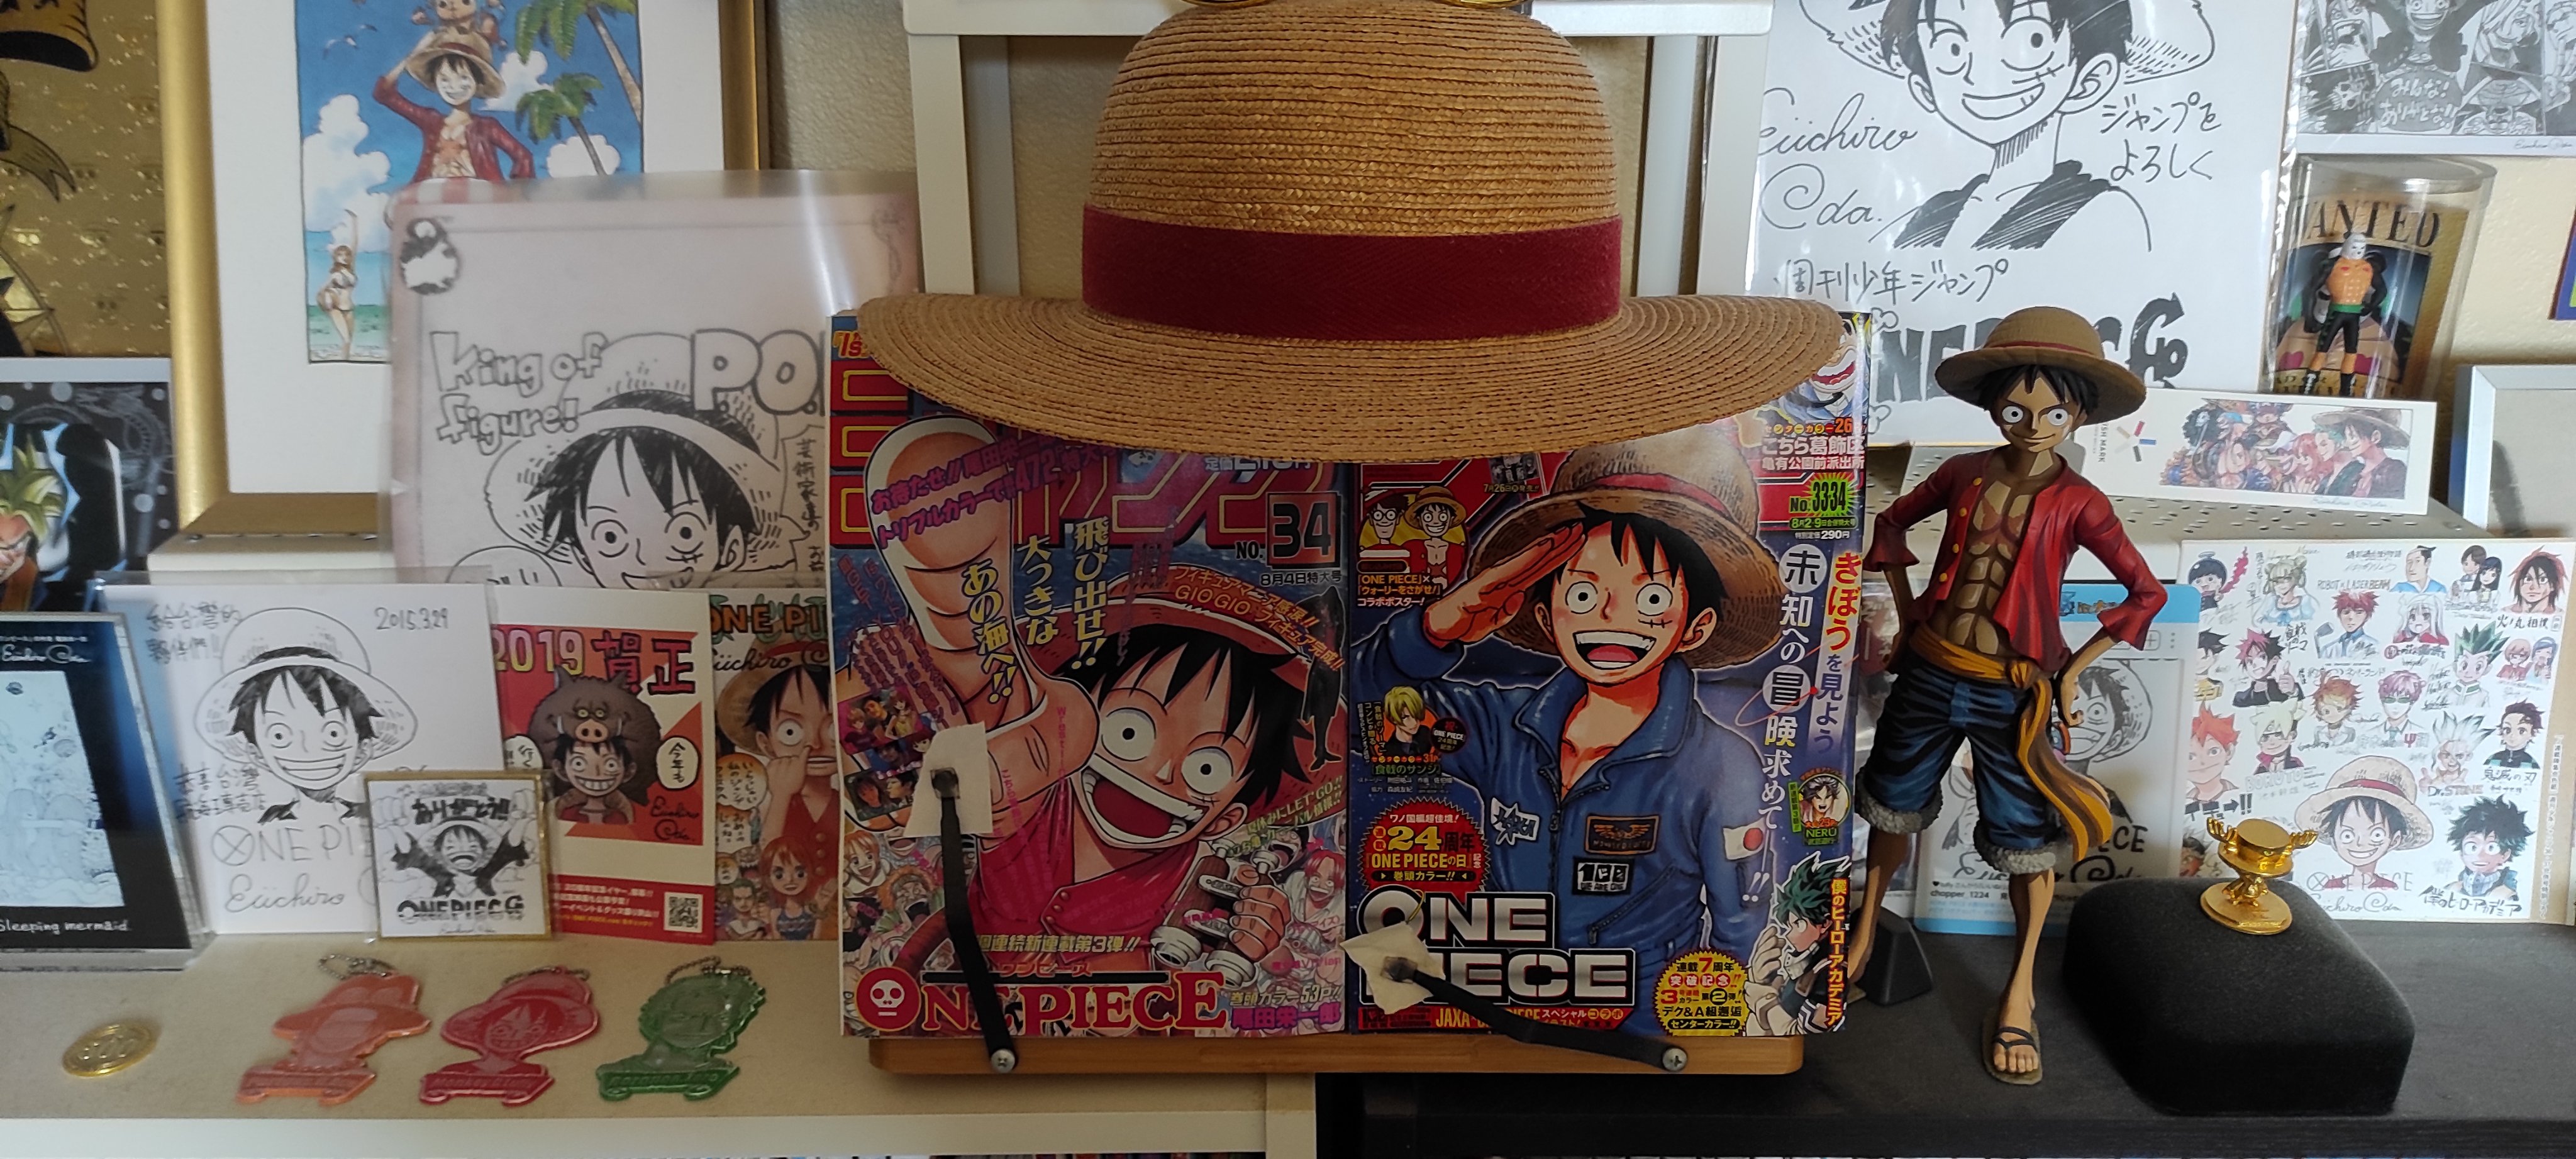 Baker ベイカー One Piece Fan Et Puis Le Weekly Shōnen Jump 21 N 33 34 Avec Une Page De Journal Pour Le Projet Jaxa Onepiece Onepiececollection Onepiece部屋 ワンピース ひとつなぎの大秘宝 ワンピース部屋